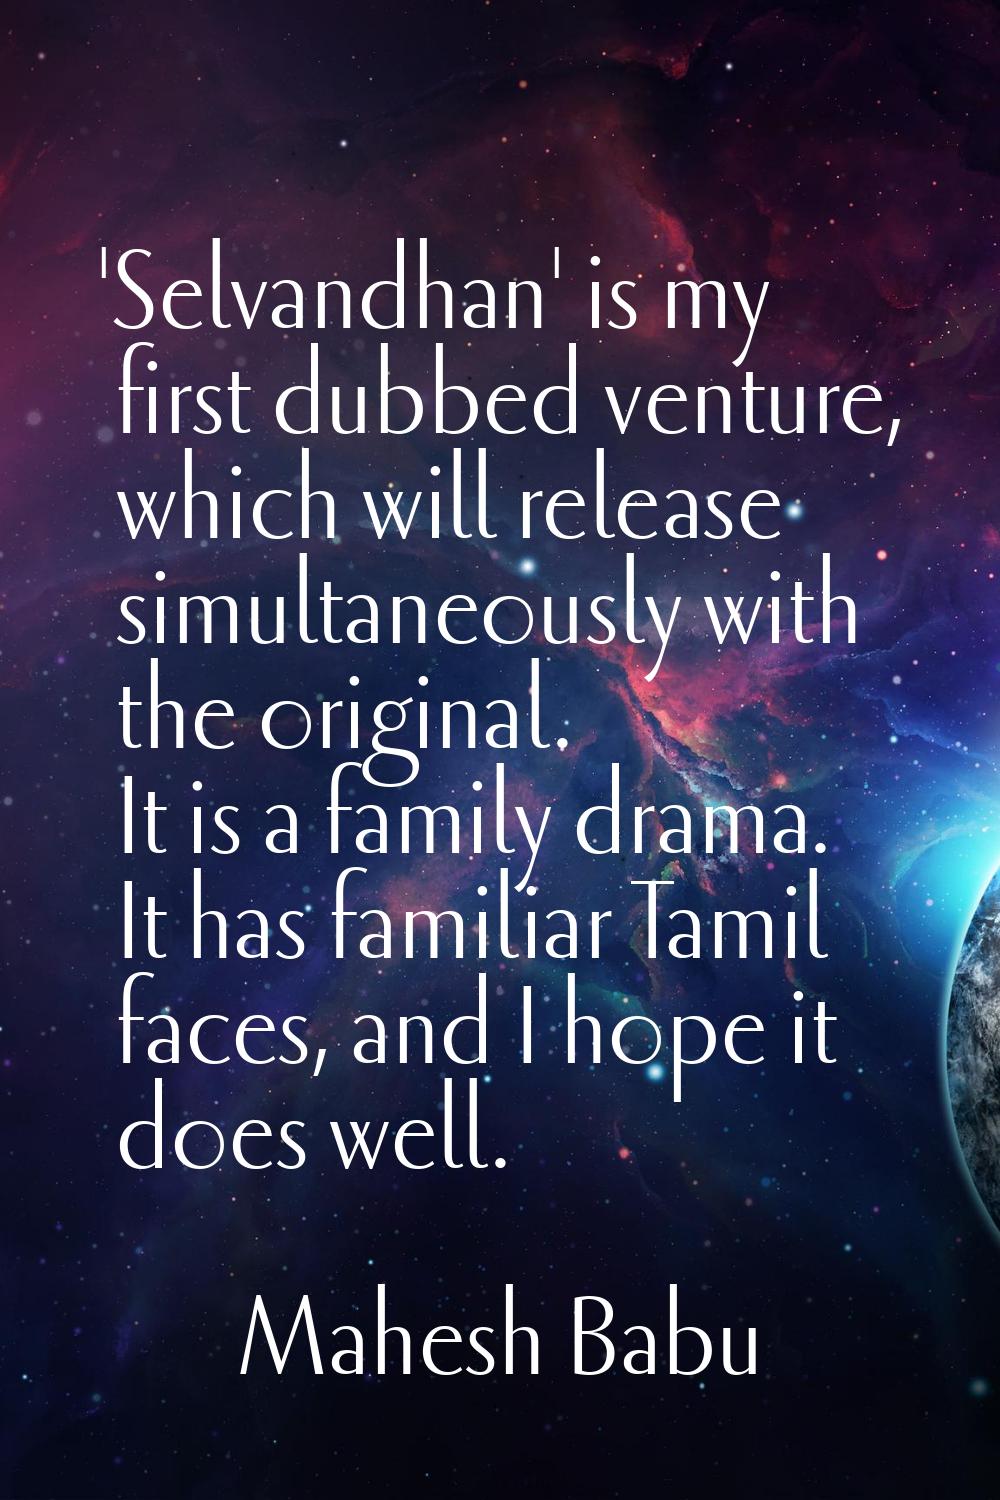 'Selvandhan' is my first dubbed venture, which will release simultaneously with the original. It is